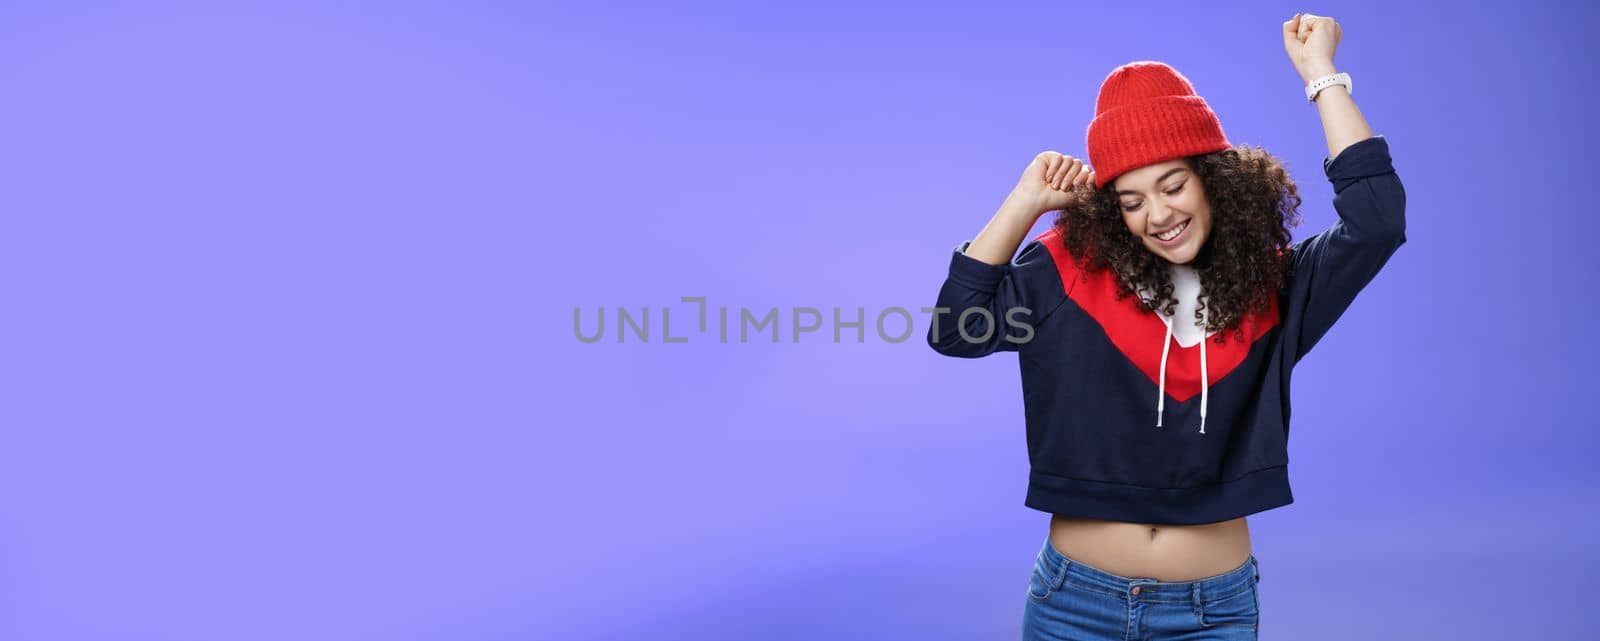 Girl celebrating favorite season in year. Portrait of carefree and joyful dancing woman with curly hair in cute red hat lifting hands in dance movements smiling enjoying music and holidays by Benzoix